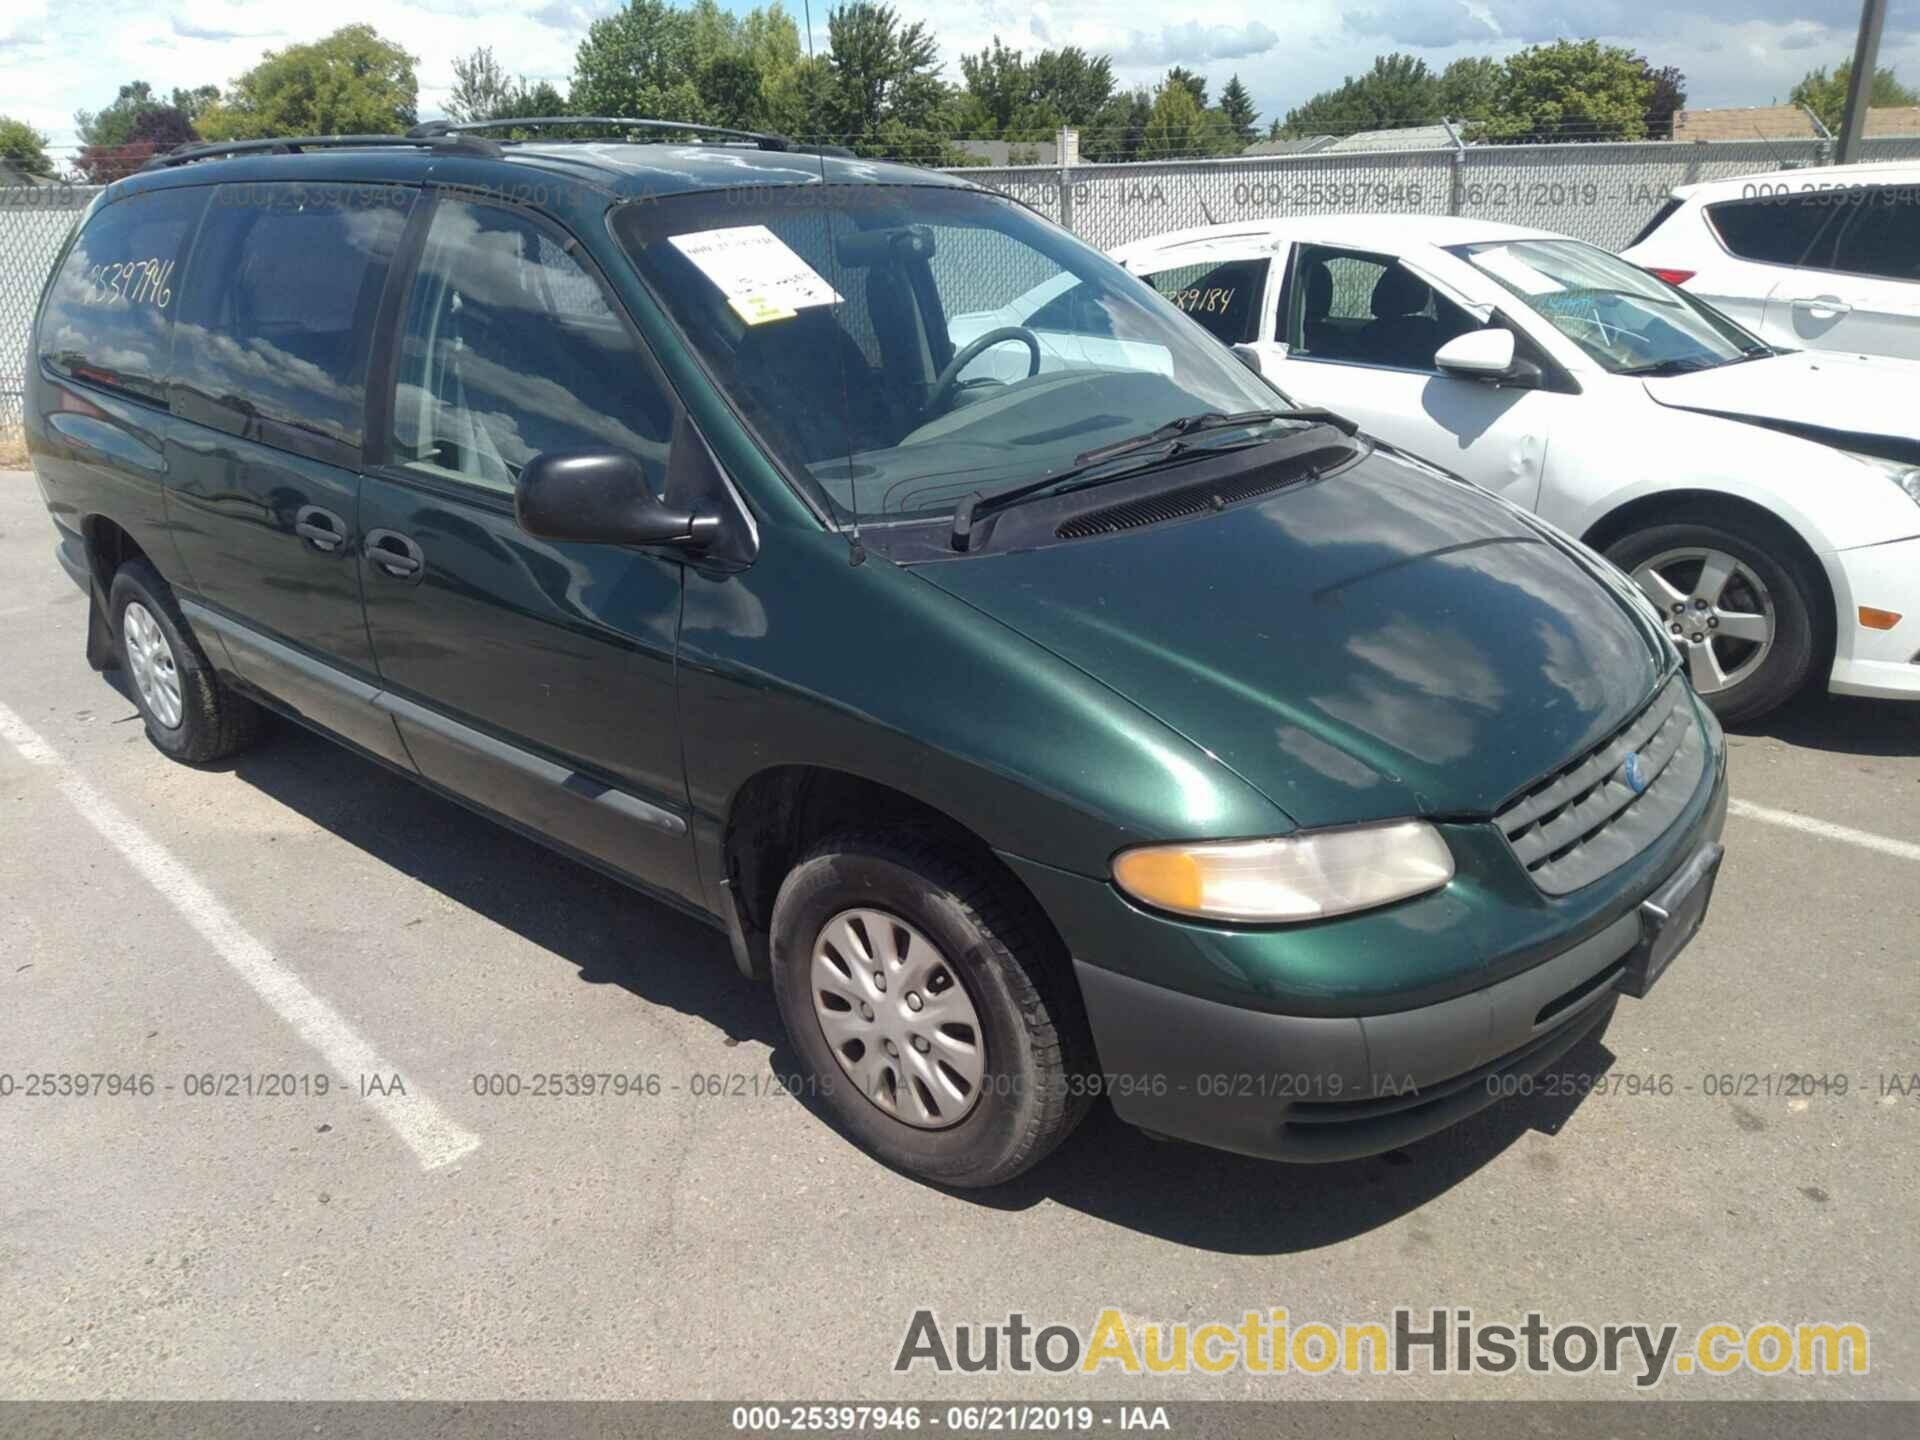 PLYMOUTH GRAND VOYAGER, 2P4GP2436VR182063